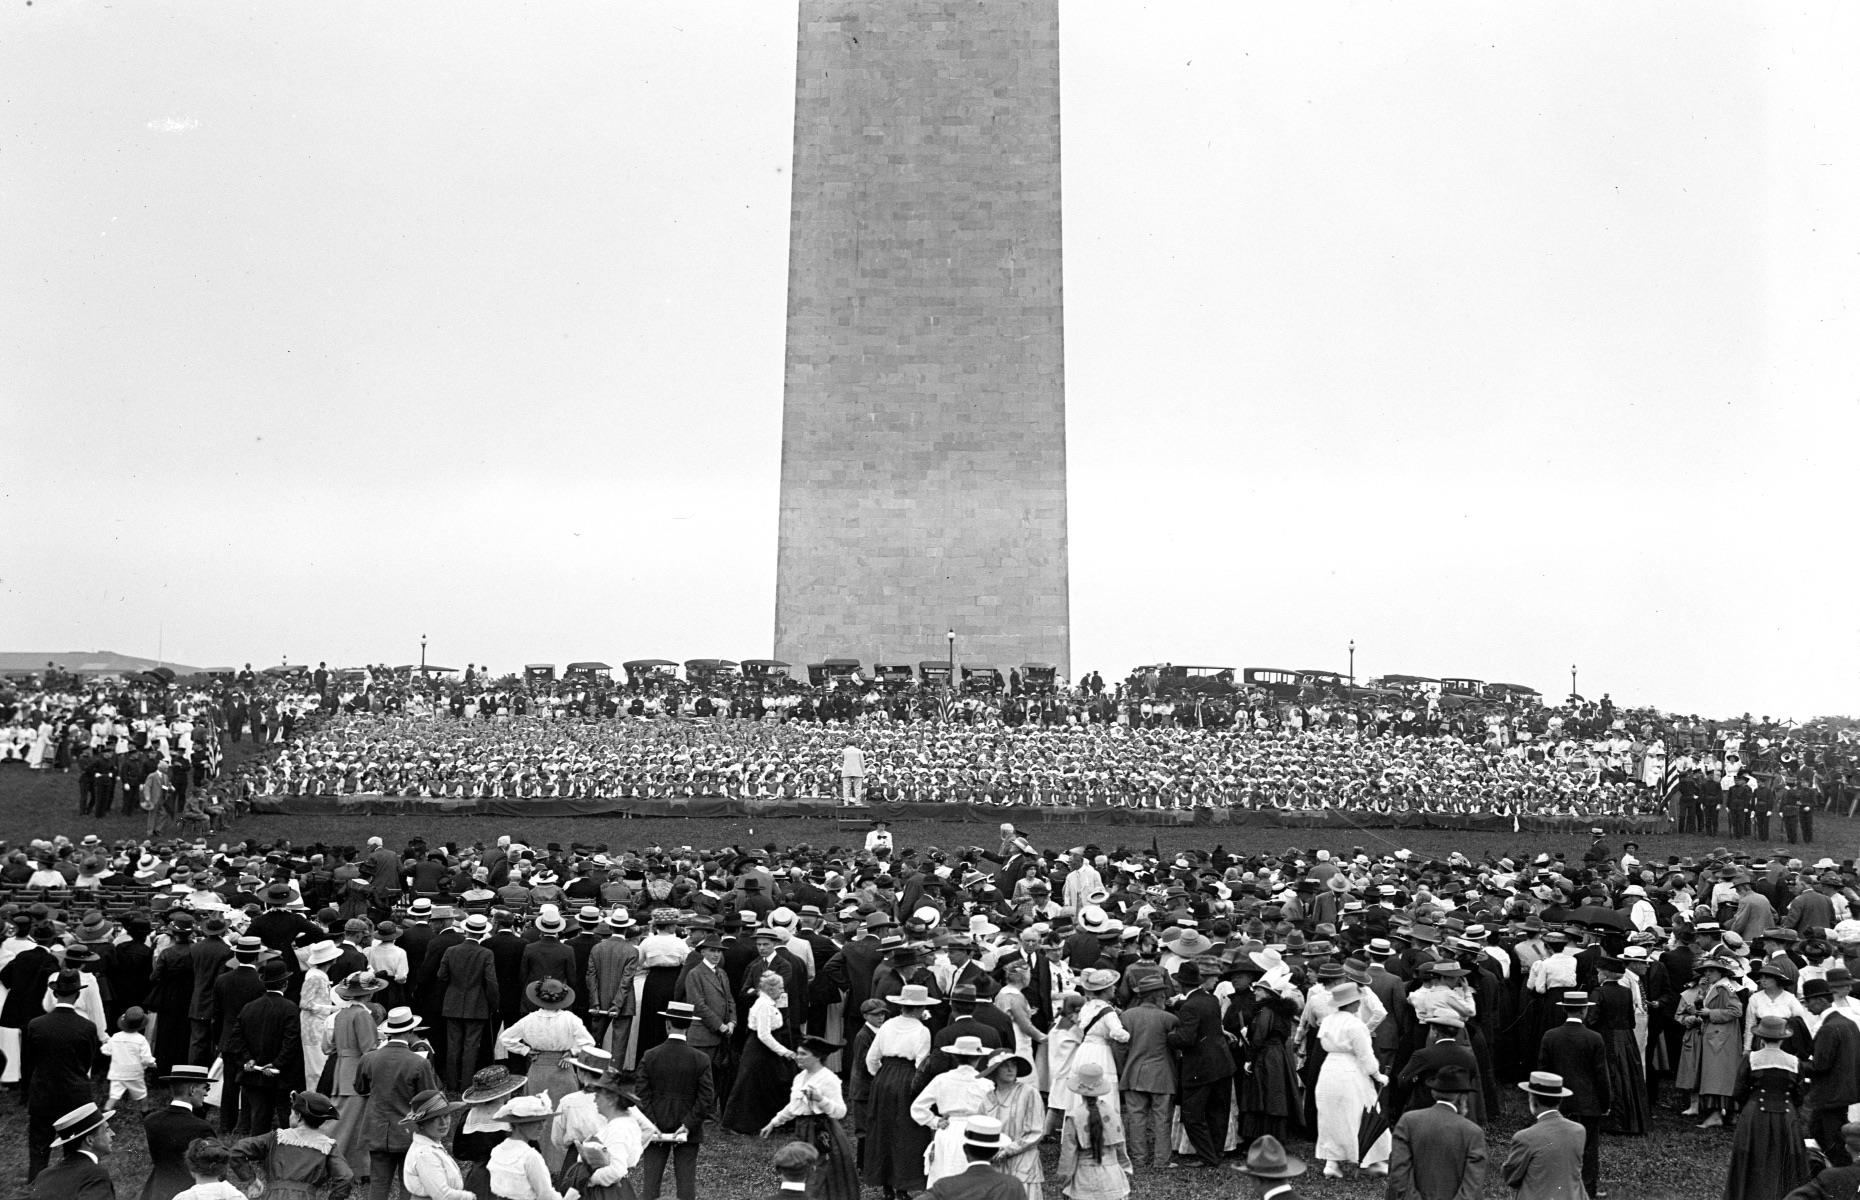 <p>Construction on the Egyptian-style obelisk of Washington Monument began in 1848 – when the first cornerstone was laid in the presence of Abraham Lincoln – and finally completed in 1888. The National Mall’s tallest structure at 555 feet (169m) high, it has been a popular gathering spot for more than a century.</p>  <p>It's pictured here in 1917 at an event to commemorate the American Civil War, when a large crowd formed a human US flag on the ground holding cardboard stars to represent the states.</p>